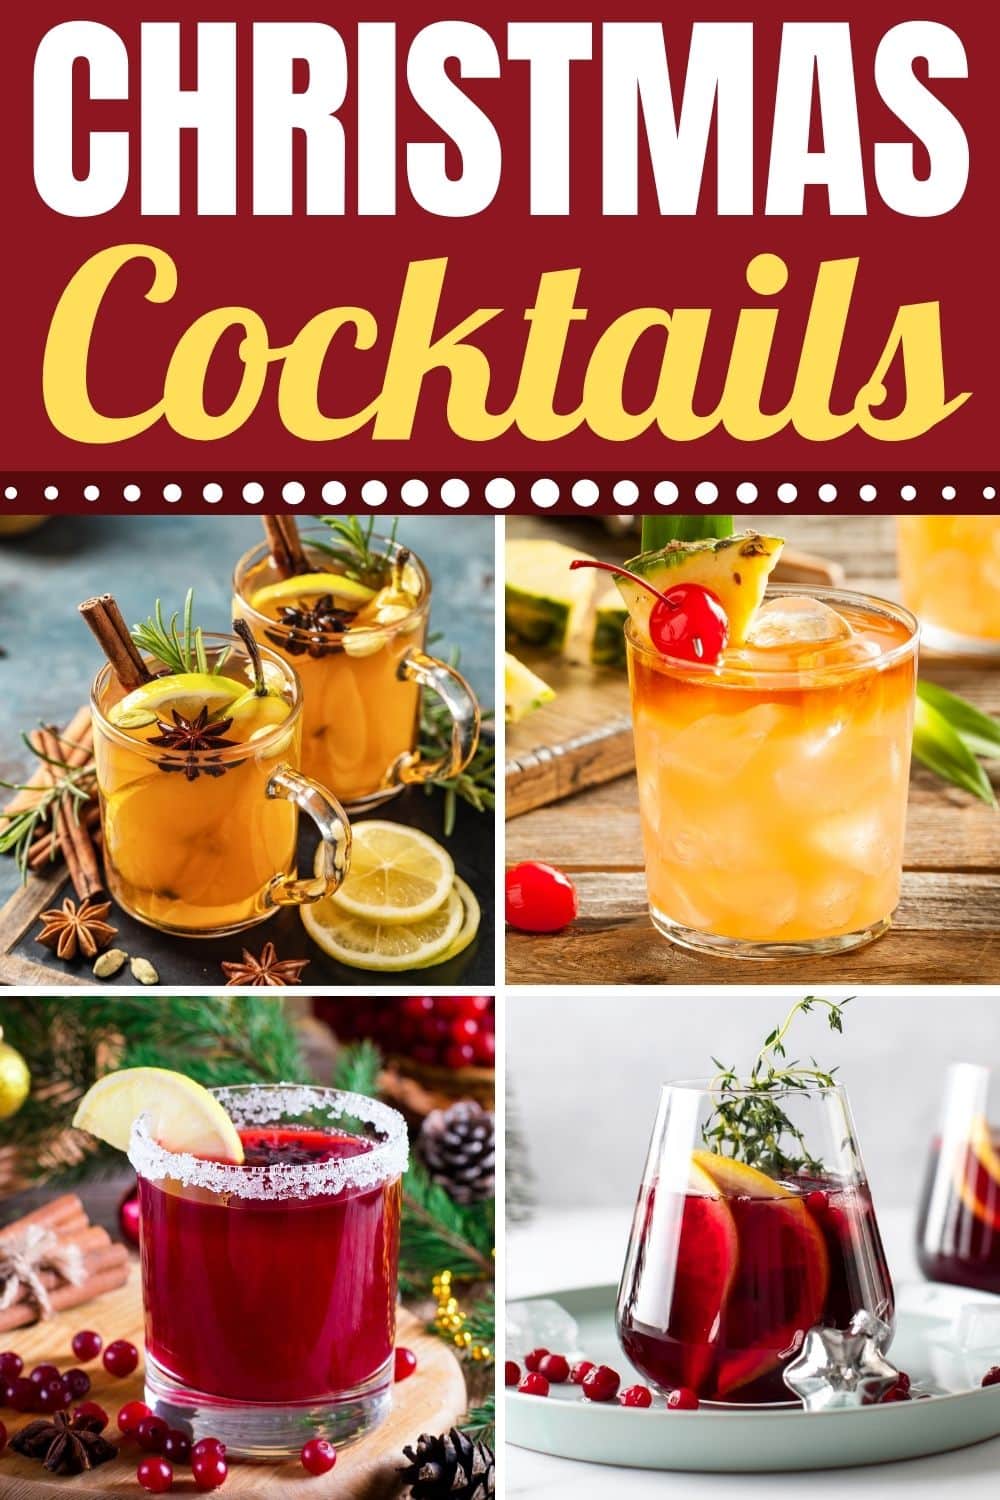 26 Easy Christmas Cocktails - Insanely Good